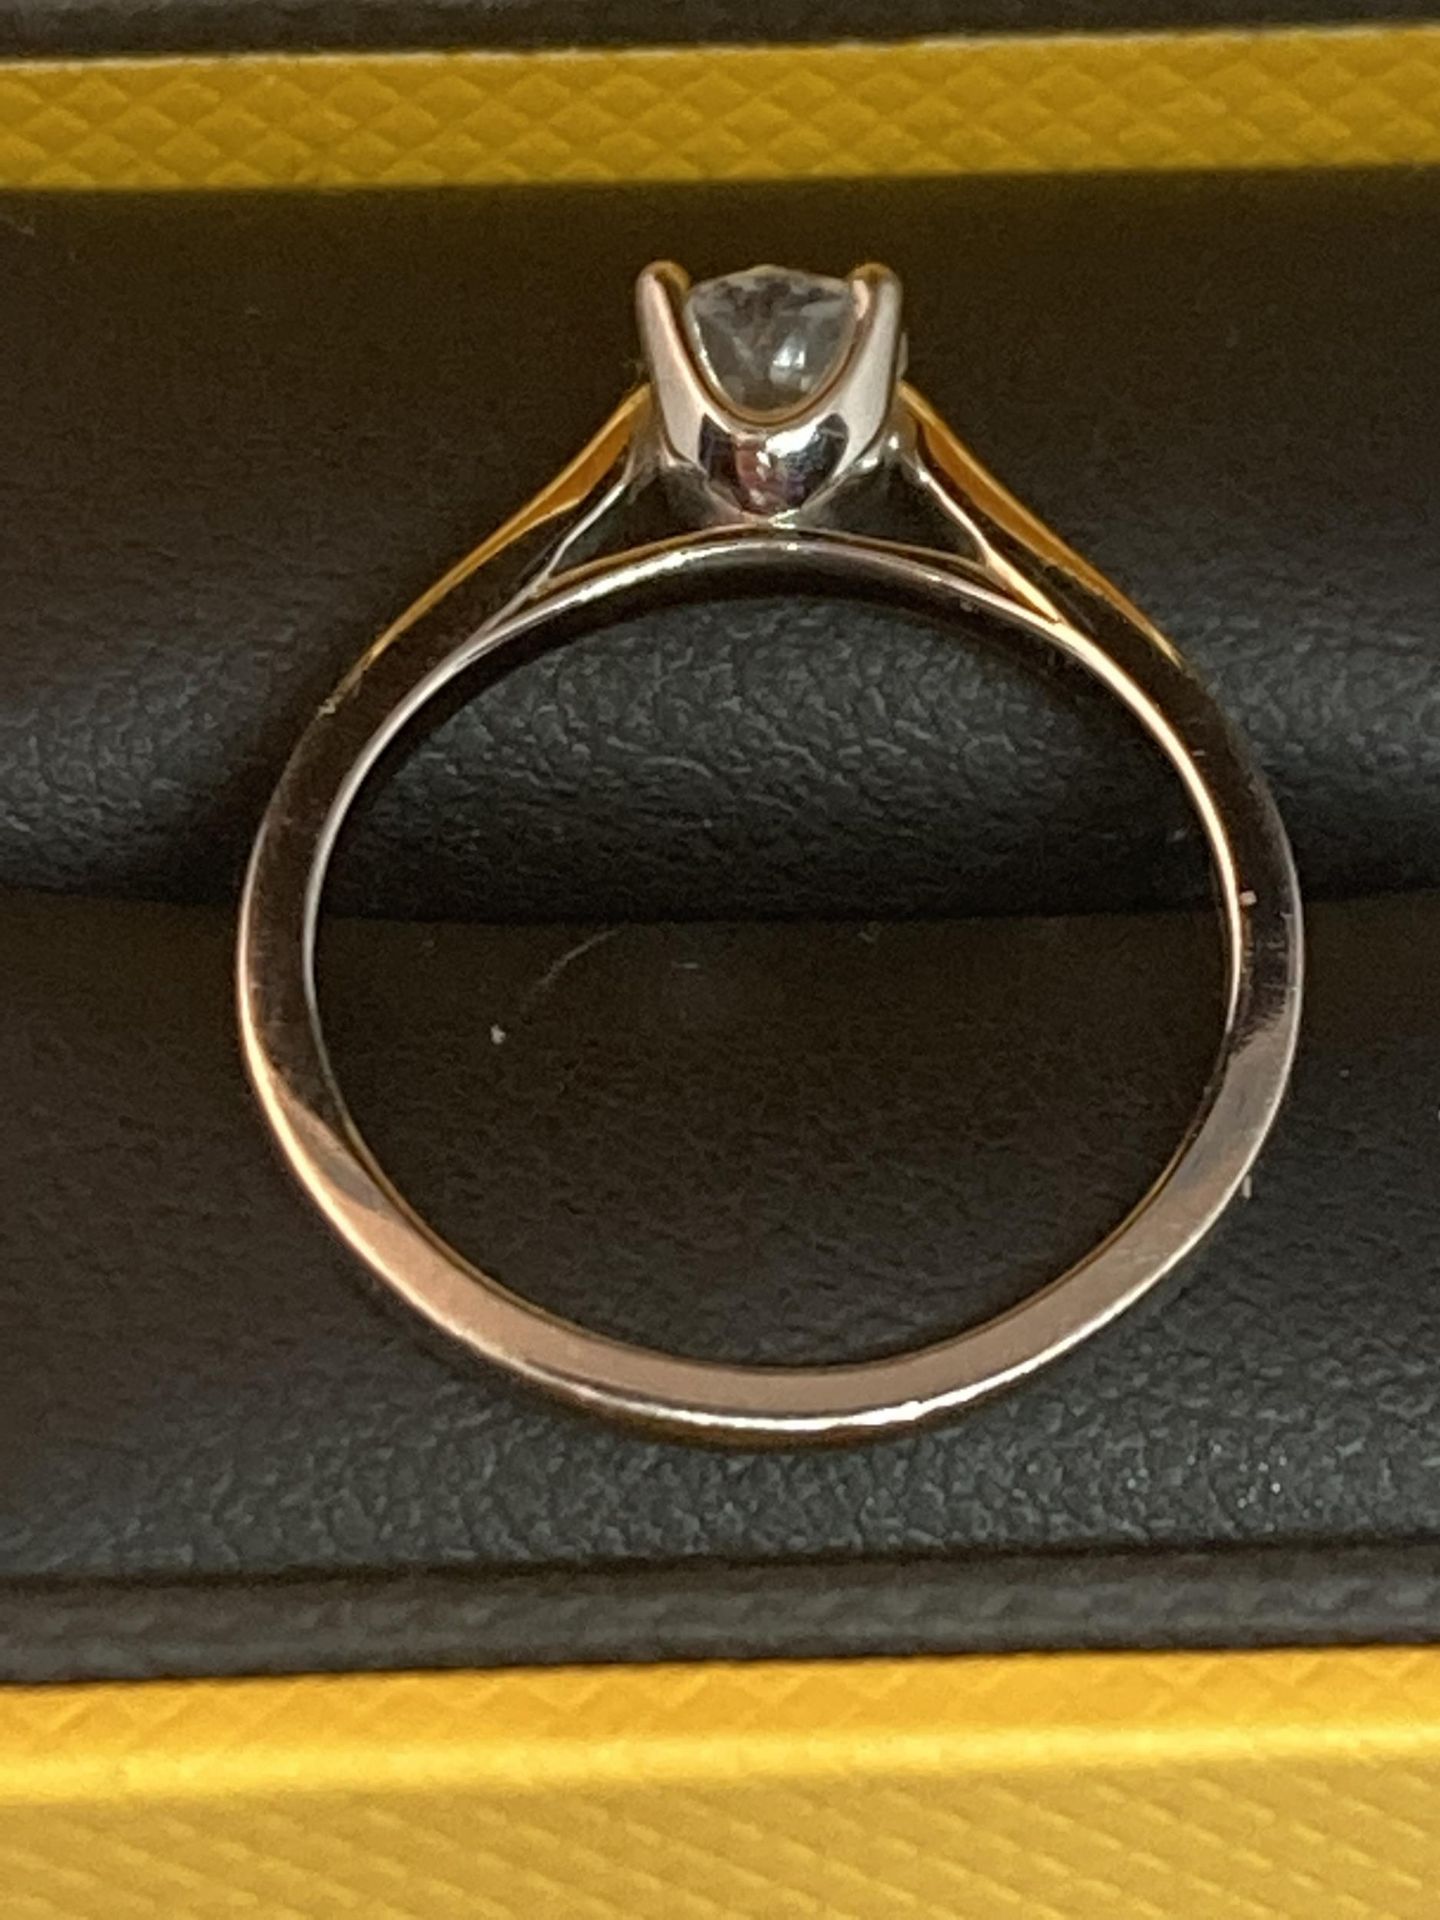 AN 18 CARAT WHITE GOLD RING WITH A 0.5 CARAT SOLITAIRE DIAMOND COMPLETE WITH GGI CERTIFICATE IN - Image 4 of 7